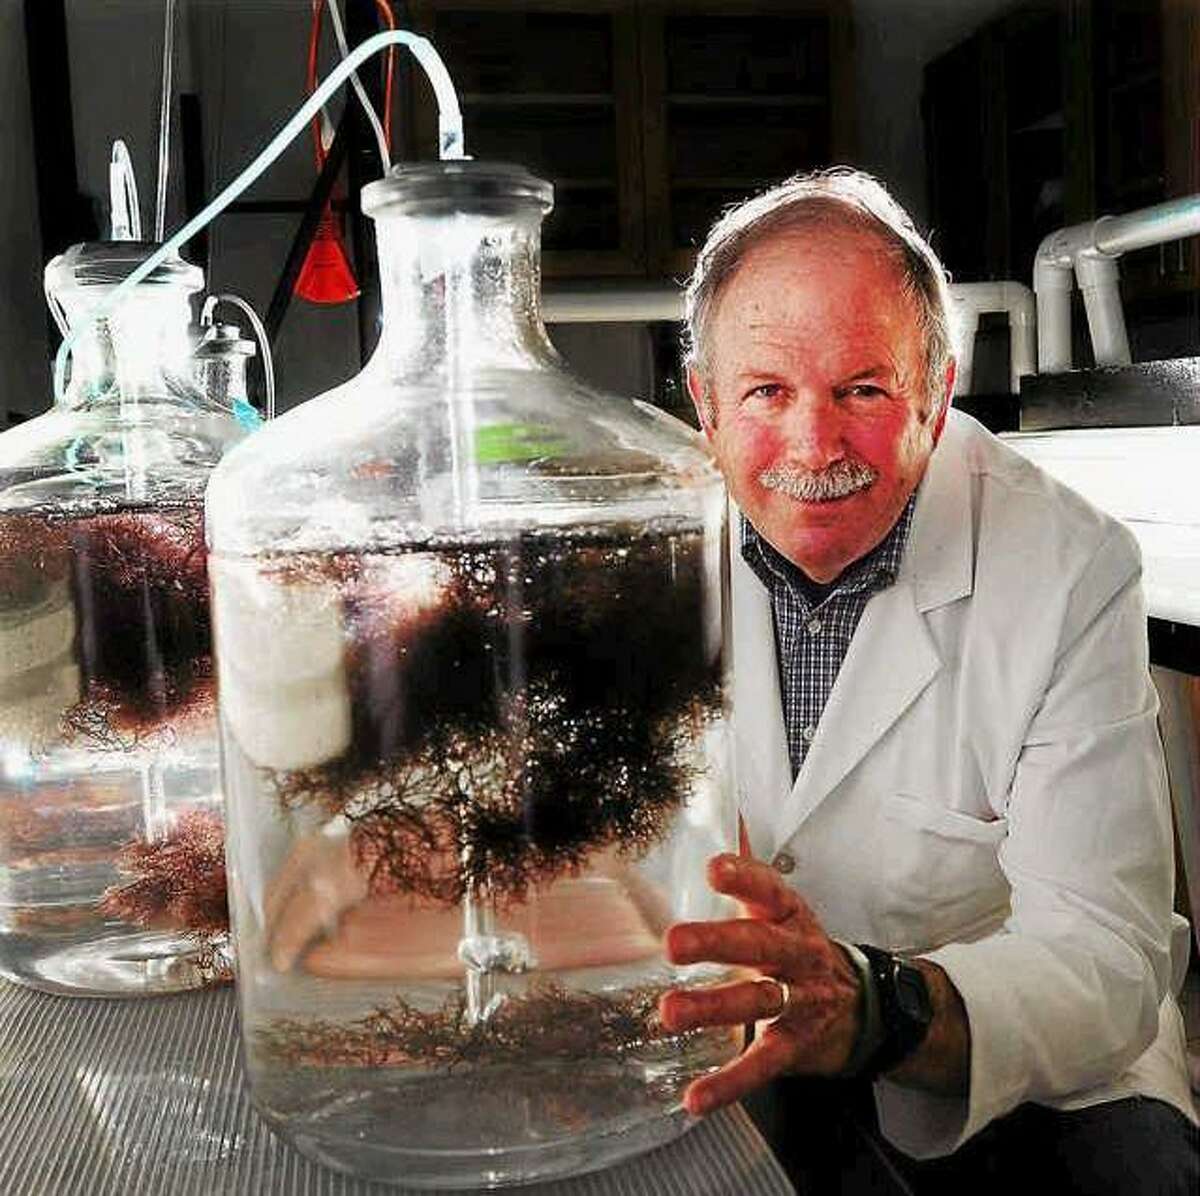 Charles Yarish, a world expert in aquaculture cultivated seaweed, sits in a seaweed nursery lab with a summer crop of the red seaweed Gracilaria at the Ecology Evolutionary Biology and Marine Sciences department at the University of Connecticut Stamford, Connecticut Branch Wednesday July 10, 2013. Yarish has been involved in research on ways to grow kelp and other seaweed as commercially available sea vegetable crops. Peter Hvizdak -- Register